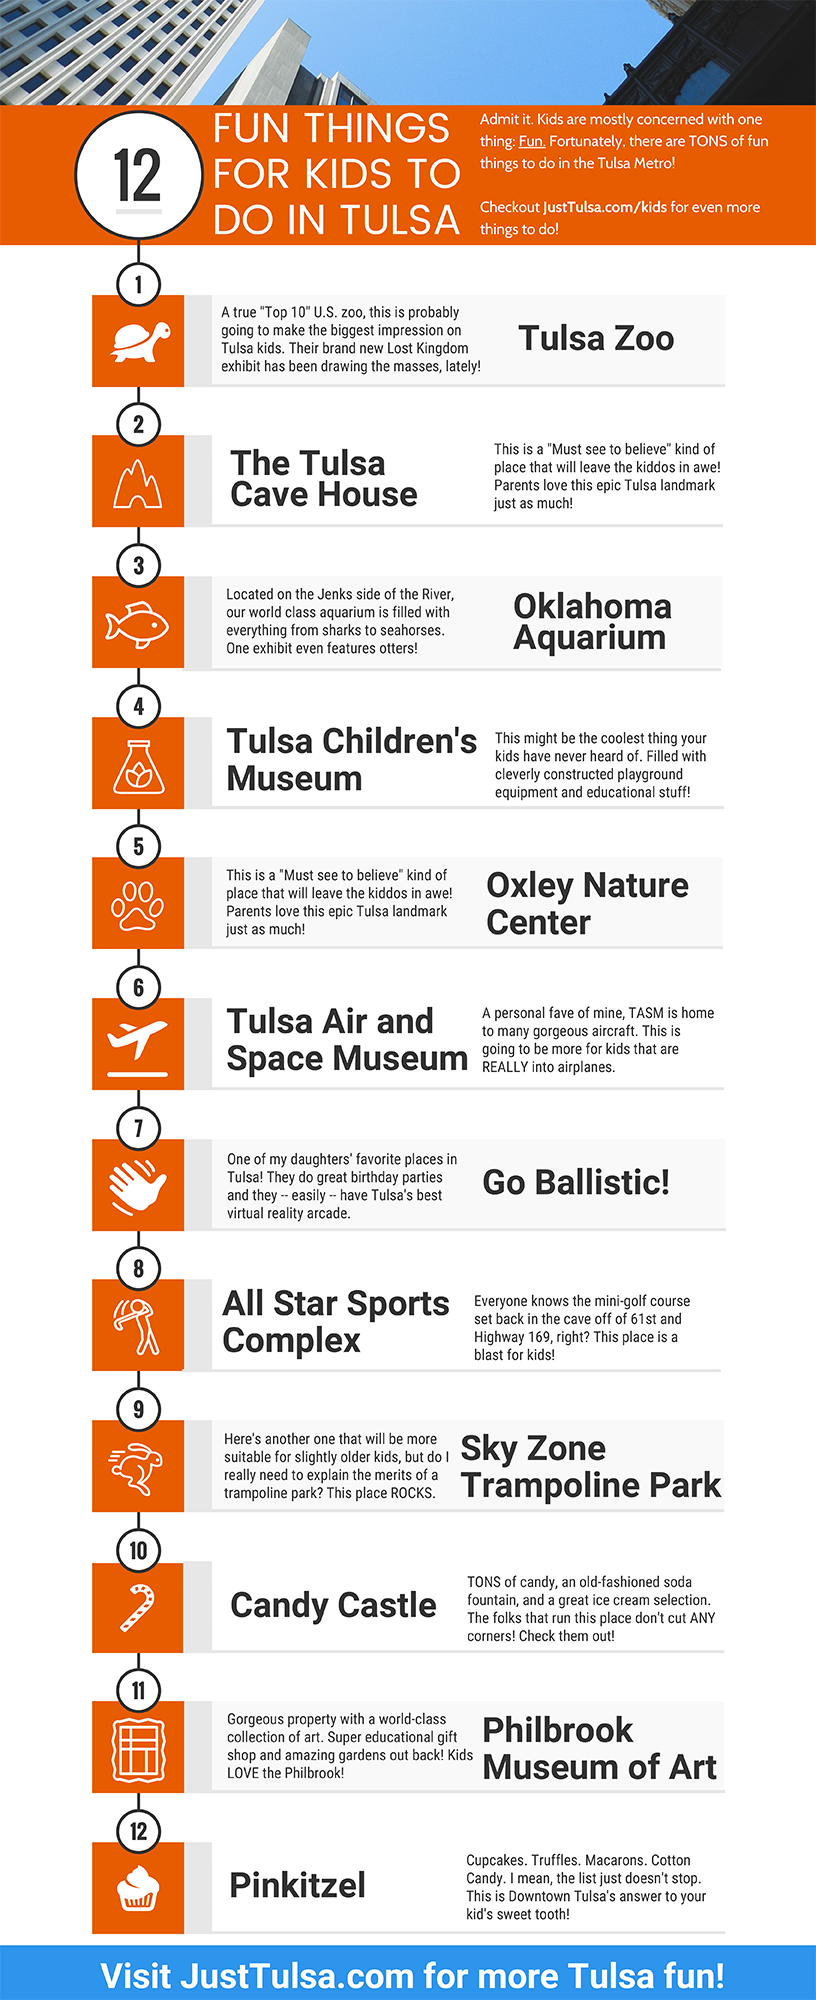 12 Things To Do WIth Kids in Tulsa [INFOGRAPHIC]